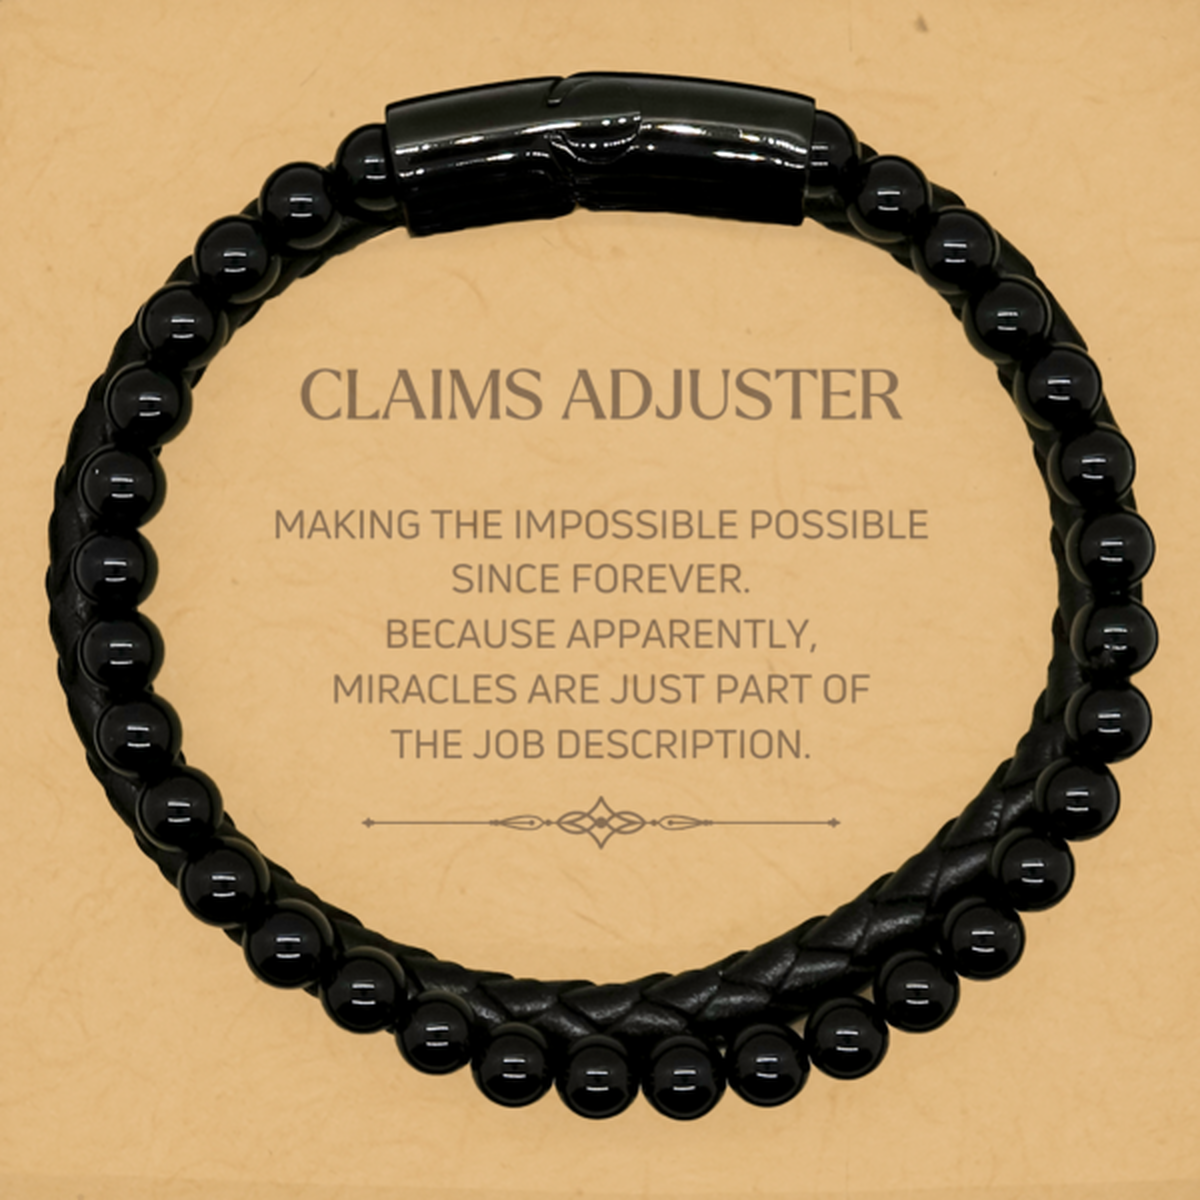 Funny Claims Adjuster Gifts, Miracles are just part of the job description, Inspirational Birthday Stone Leather Bracelets For Claims Adjuster, Men, Women, Coworkers, Friends, Boss